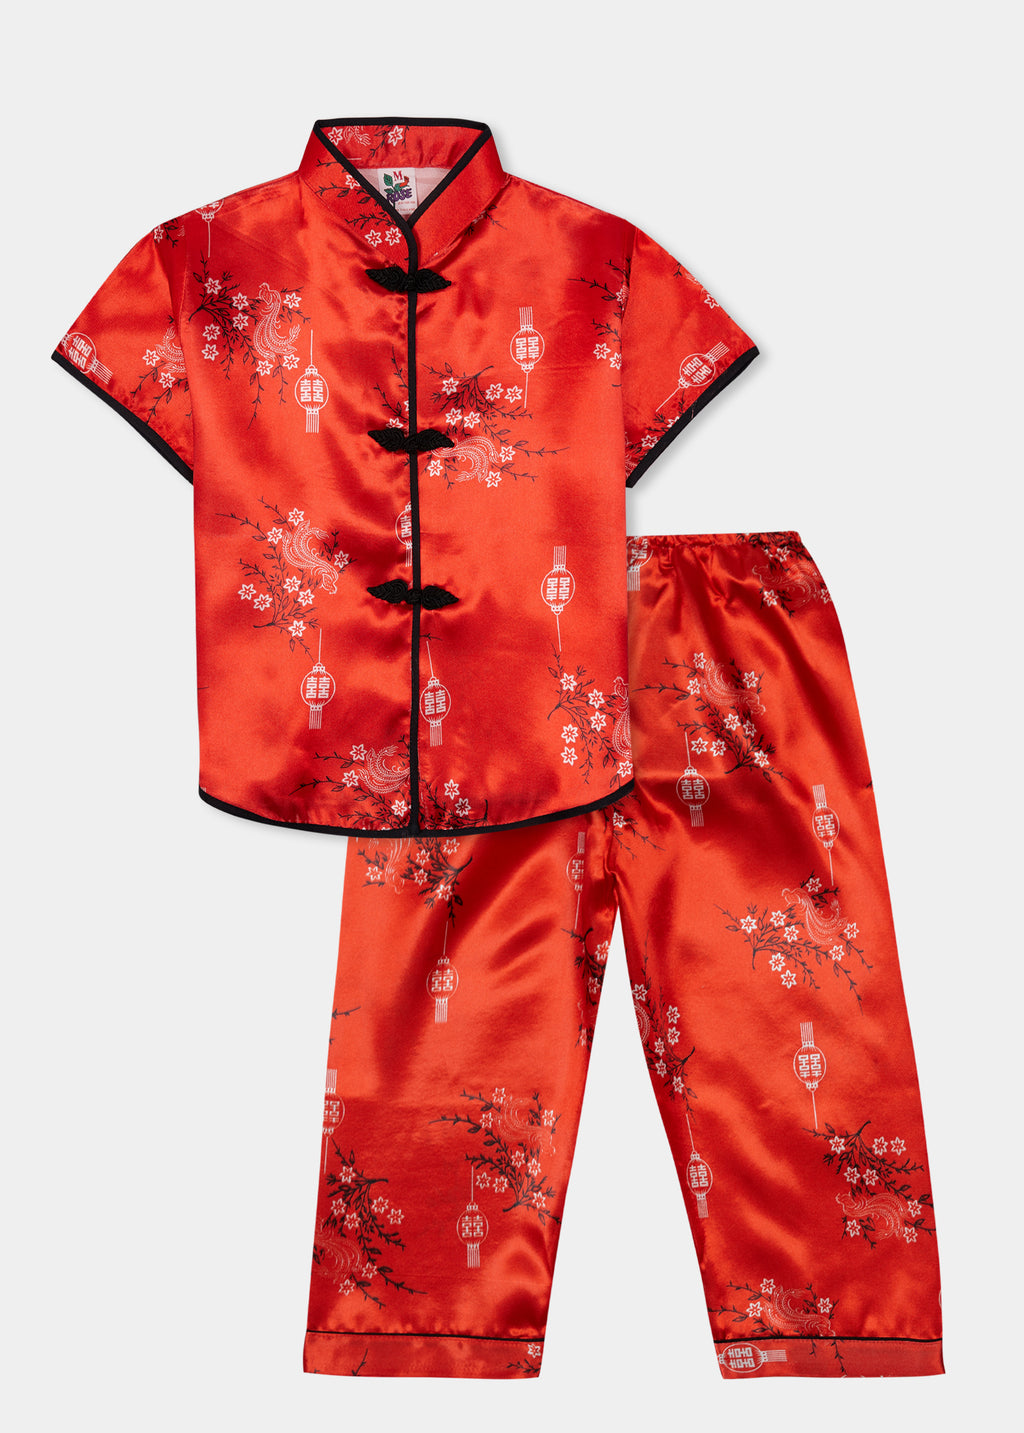 Traditionally styled pyjamas with Chinese features of mandarin collar and flower and knot frog fastenings. Manufactured in a stunning red silky rayon/polyester with a bird of paradise and Chinese lantern print - a symbol of joy and good fortune. Pyjama top has short sleeves, contrast bound mandarin collar and centre front opening which closes with flower and knot frog fastenings. Elasticated waist pyjama bottoms with contrast piped hem cuffs